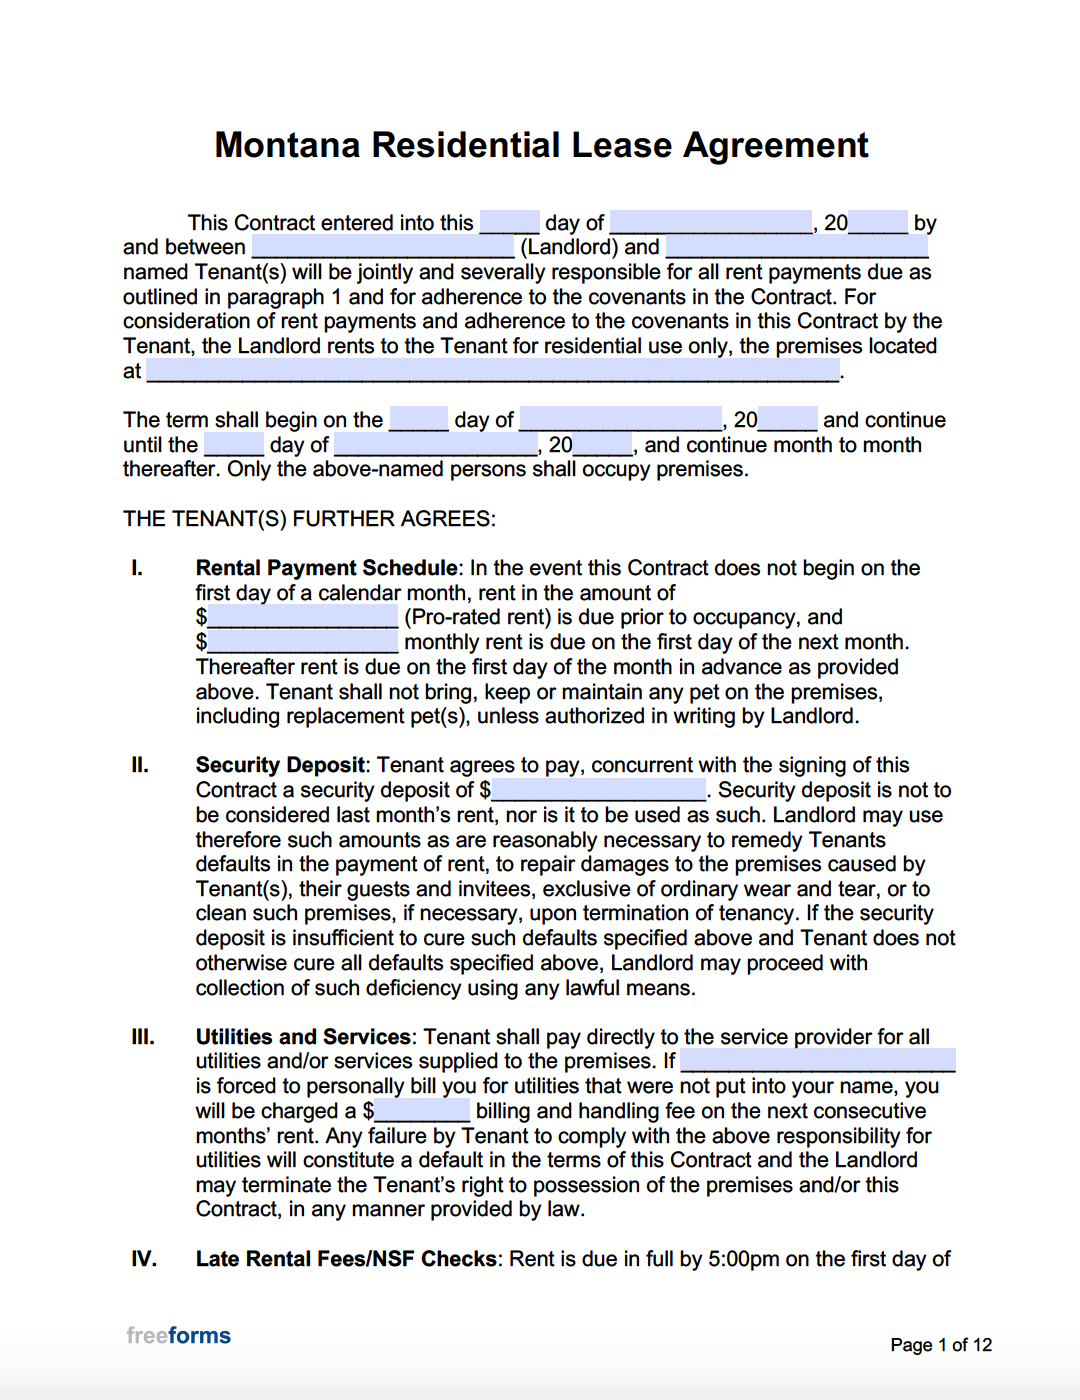 Free Lease Agreement RELEASE Form, Sample - PDF